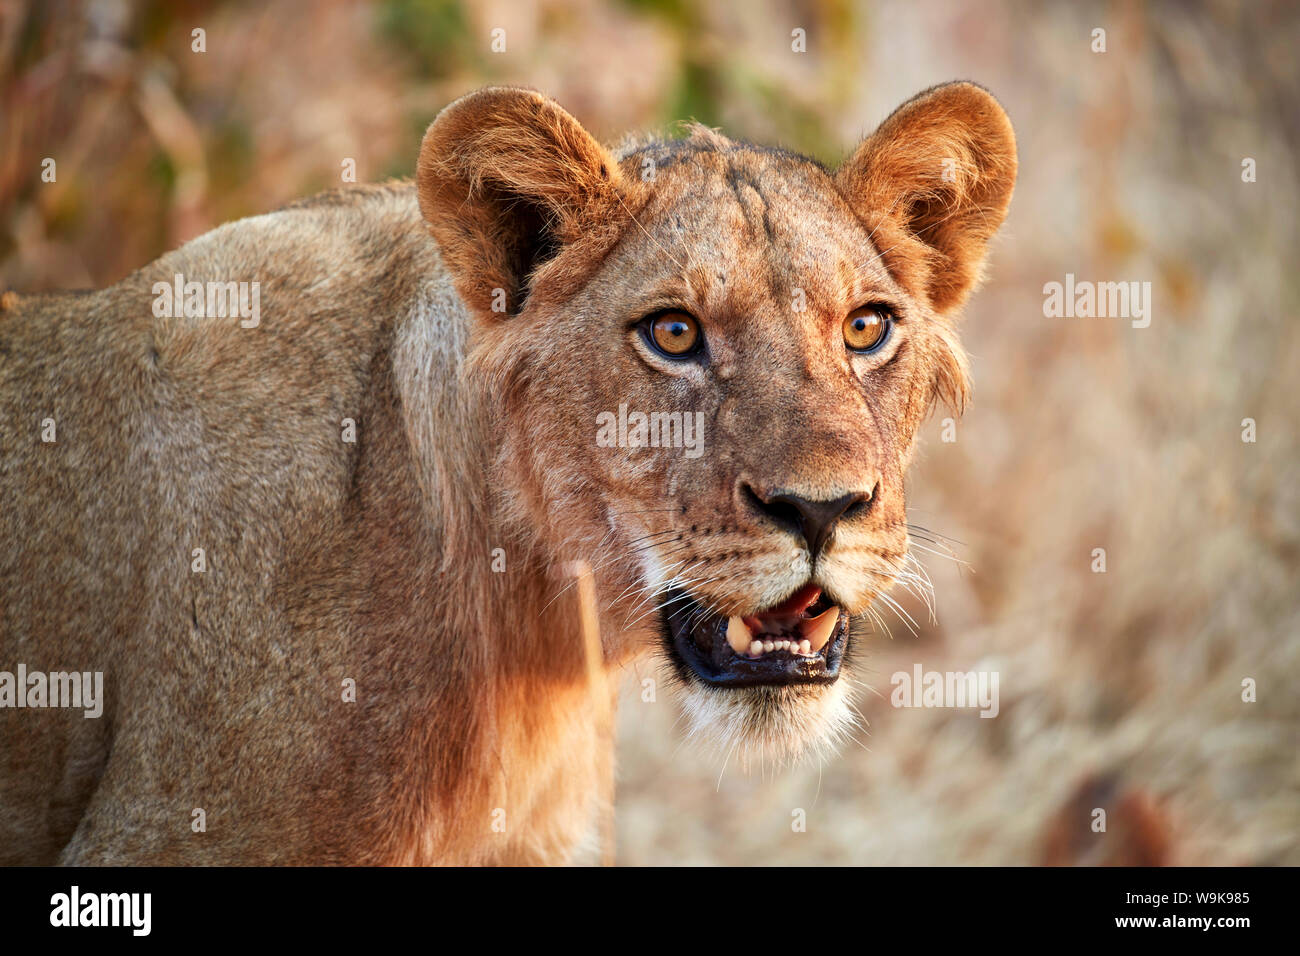 Lion (Panthera leo), young male, Ruaha National Park, Tanzania, East Africa, Africa Stock Photo